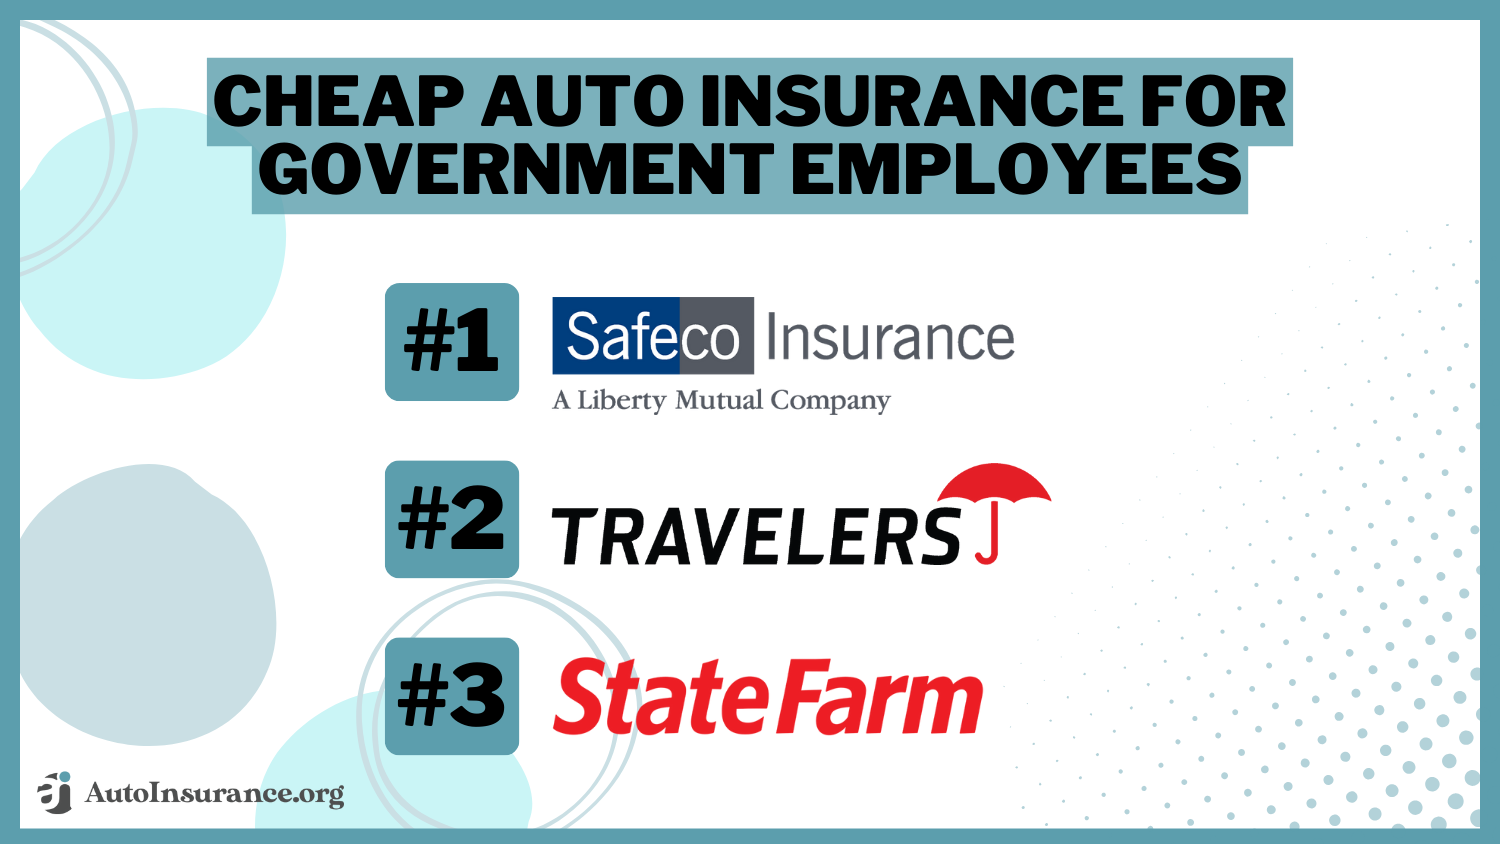 Safeco, Travelers, State Farm: Cheap Auto Insurance for Government Employees